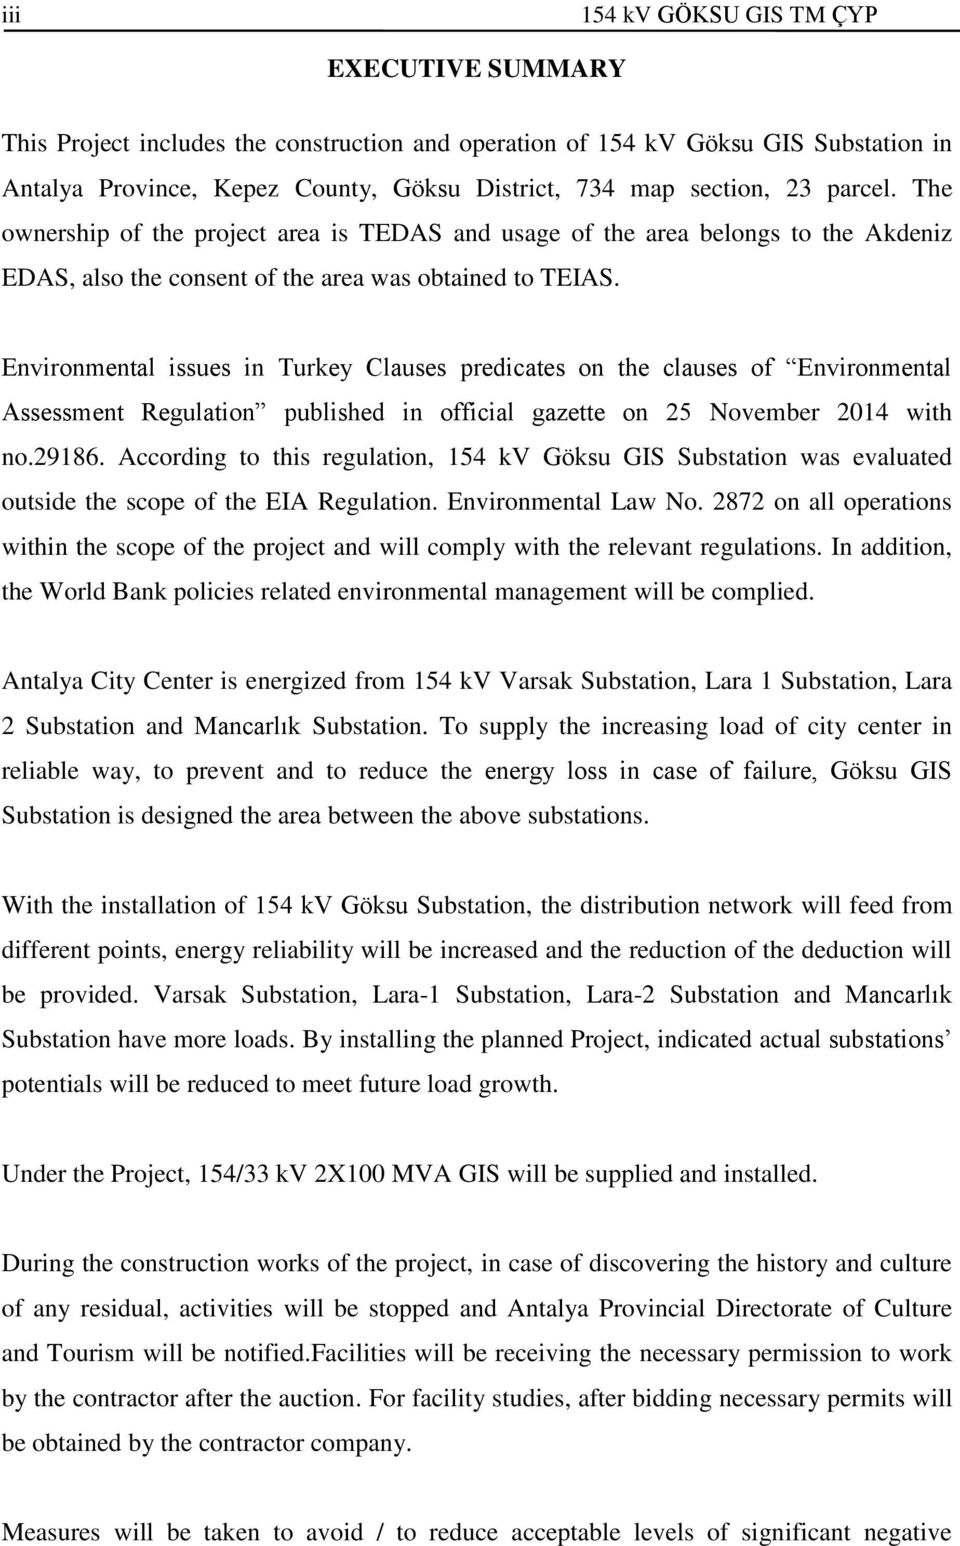 Environmental issues in Turkey Clauses predicates on the clauses of Environmental Assessment Regulation published in official gazette on 25 November 2014 with no.29186.